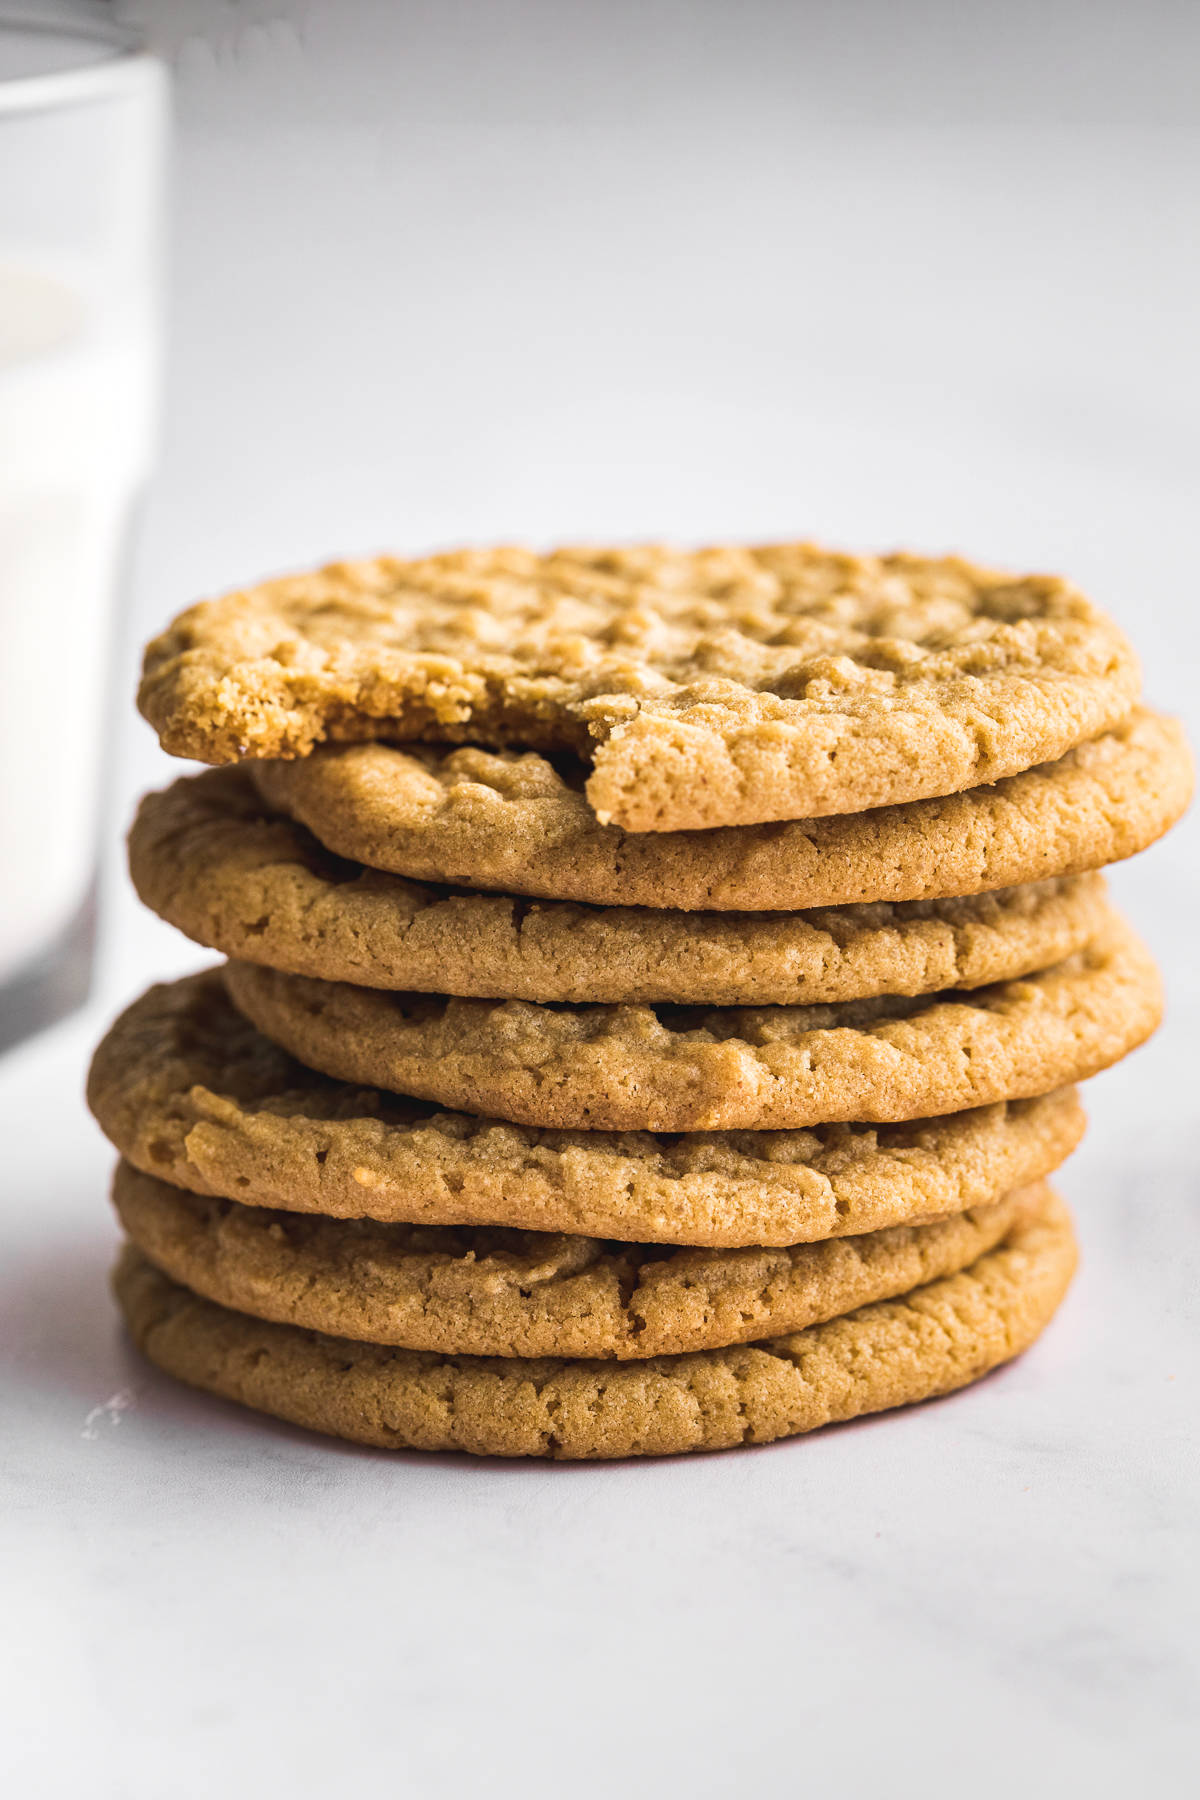 A stack of seven cookies.